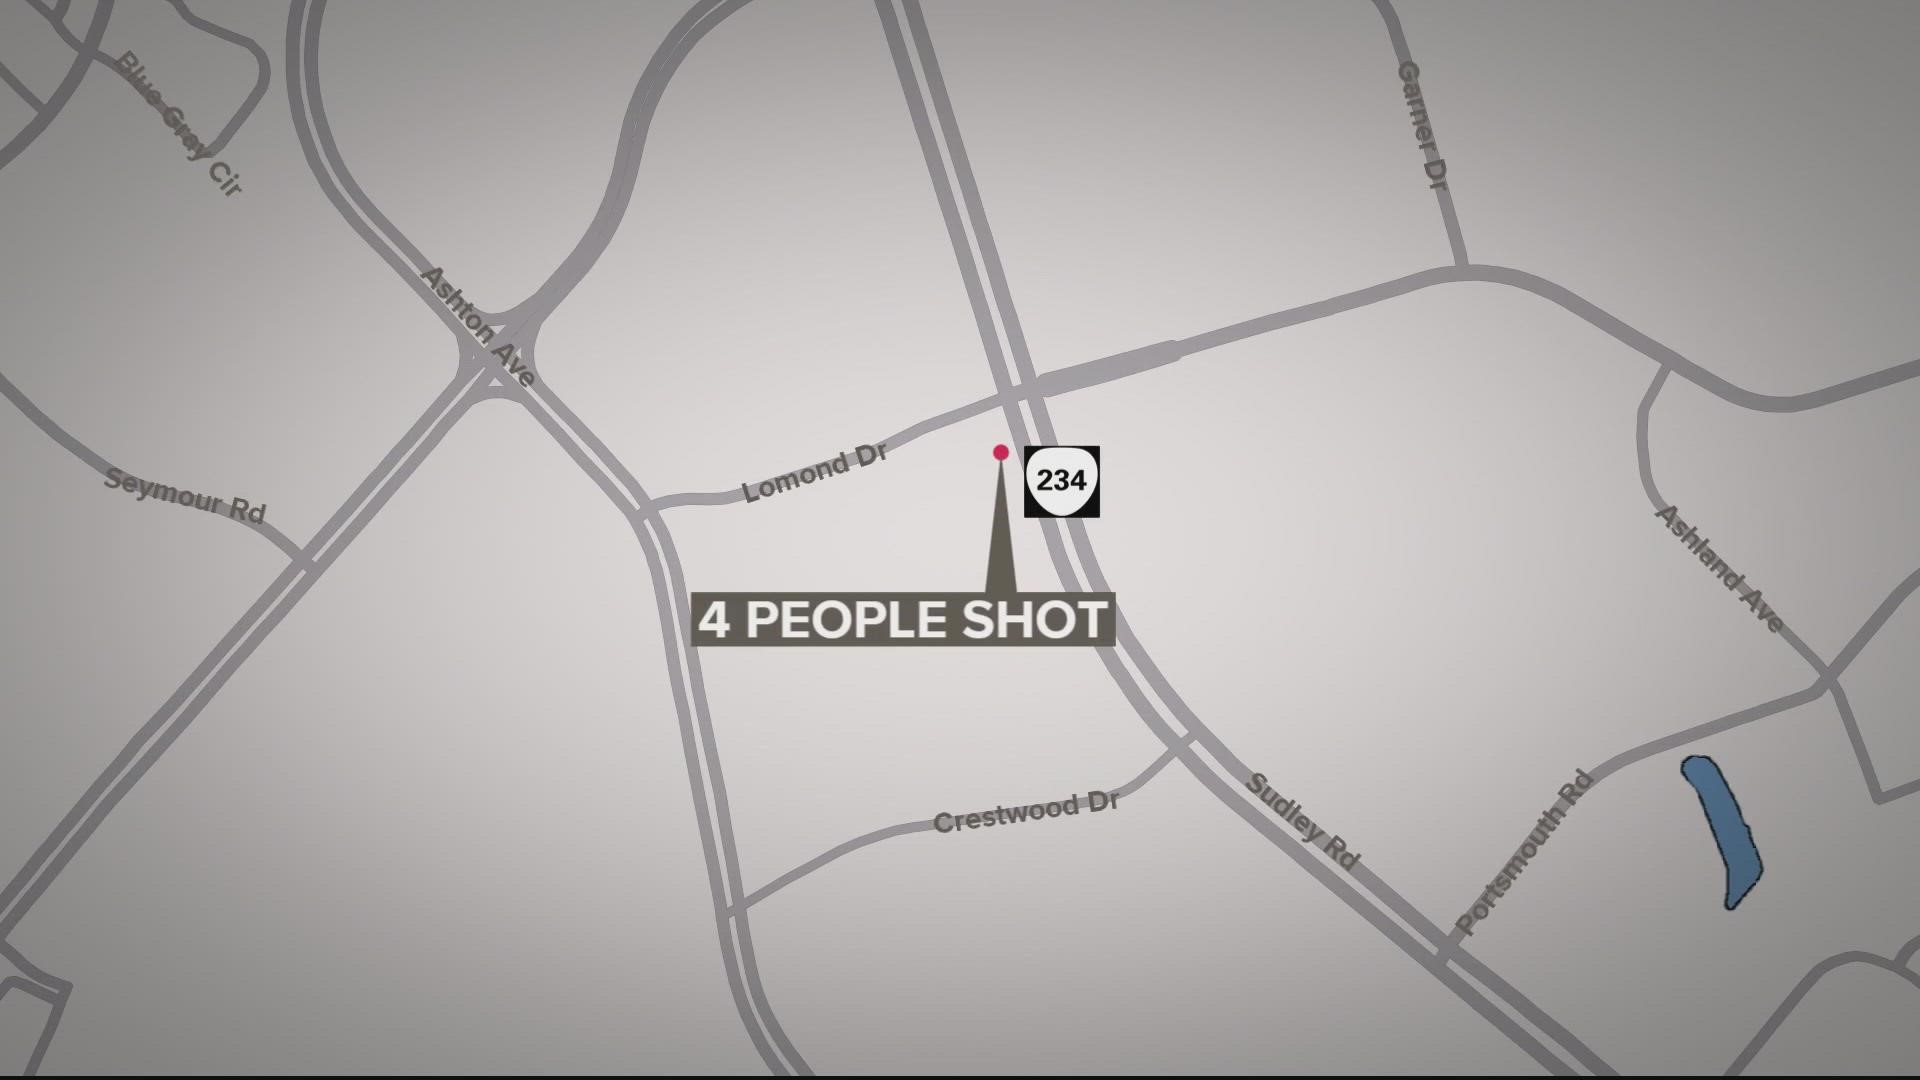 Prince William County police say that four people have been shot near Manassas, Virginia.